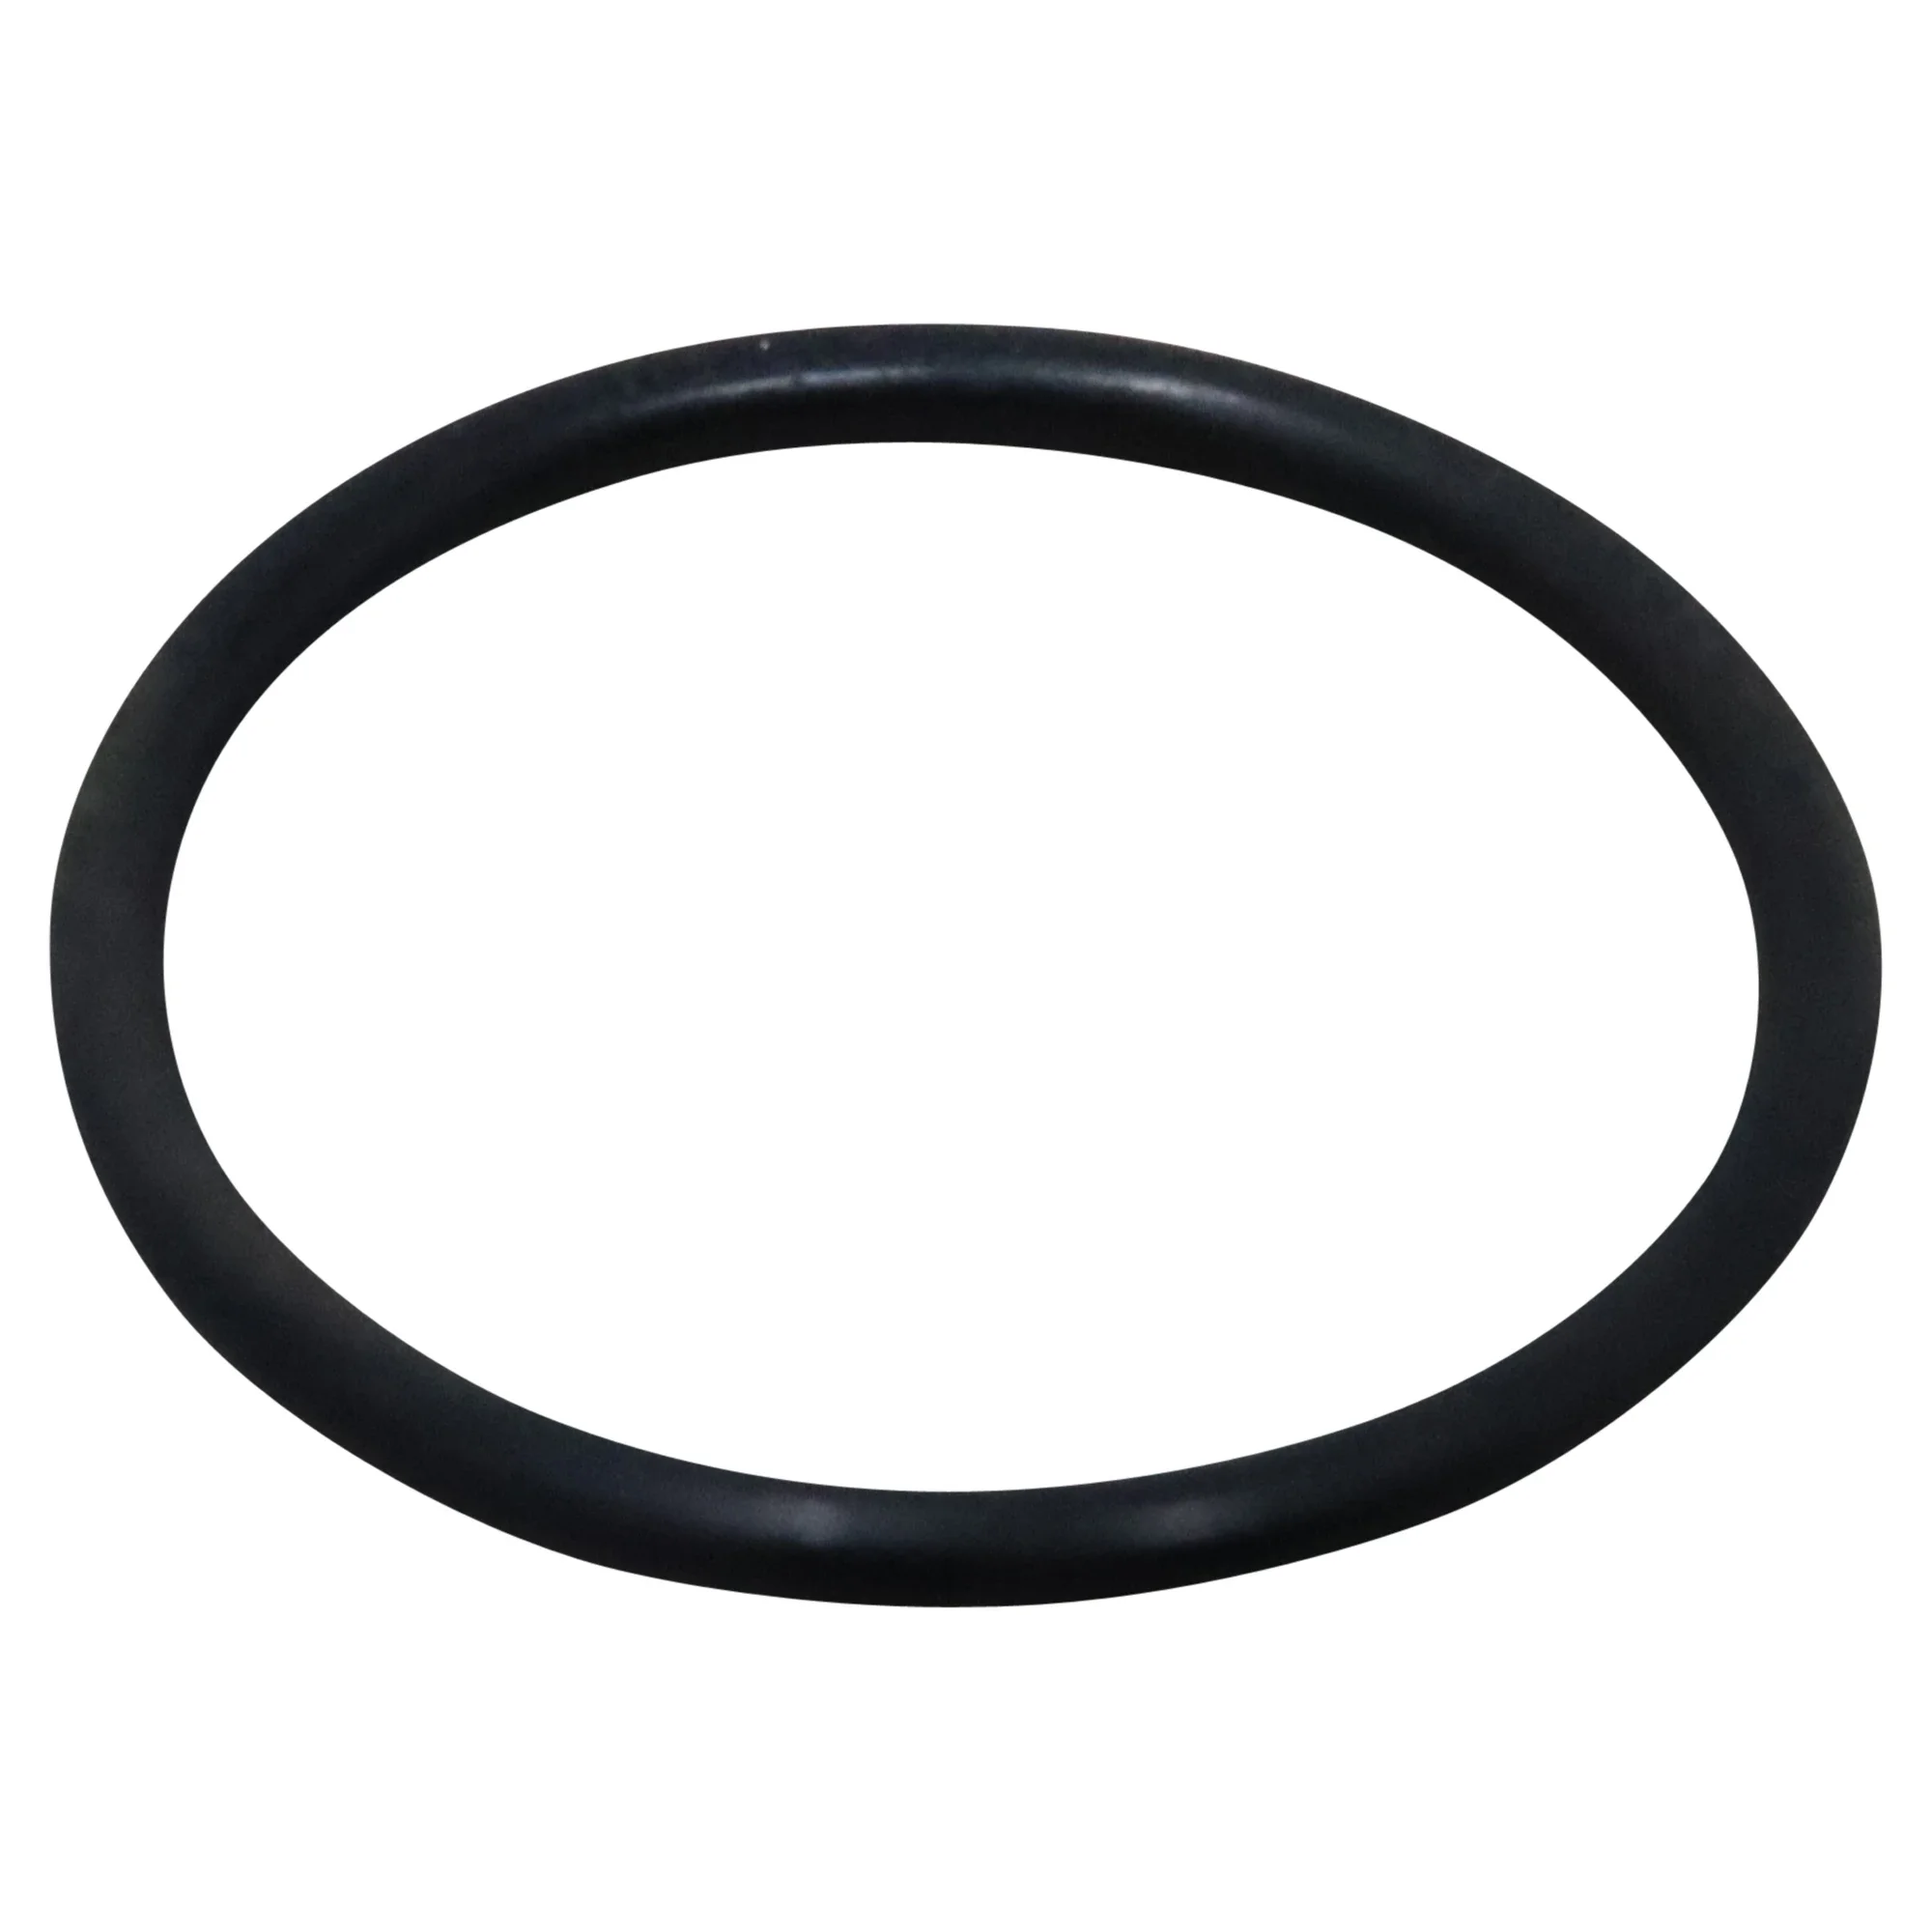 Wastebuilt® Replacement for 3/4 ORS Face Seal O-Ring